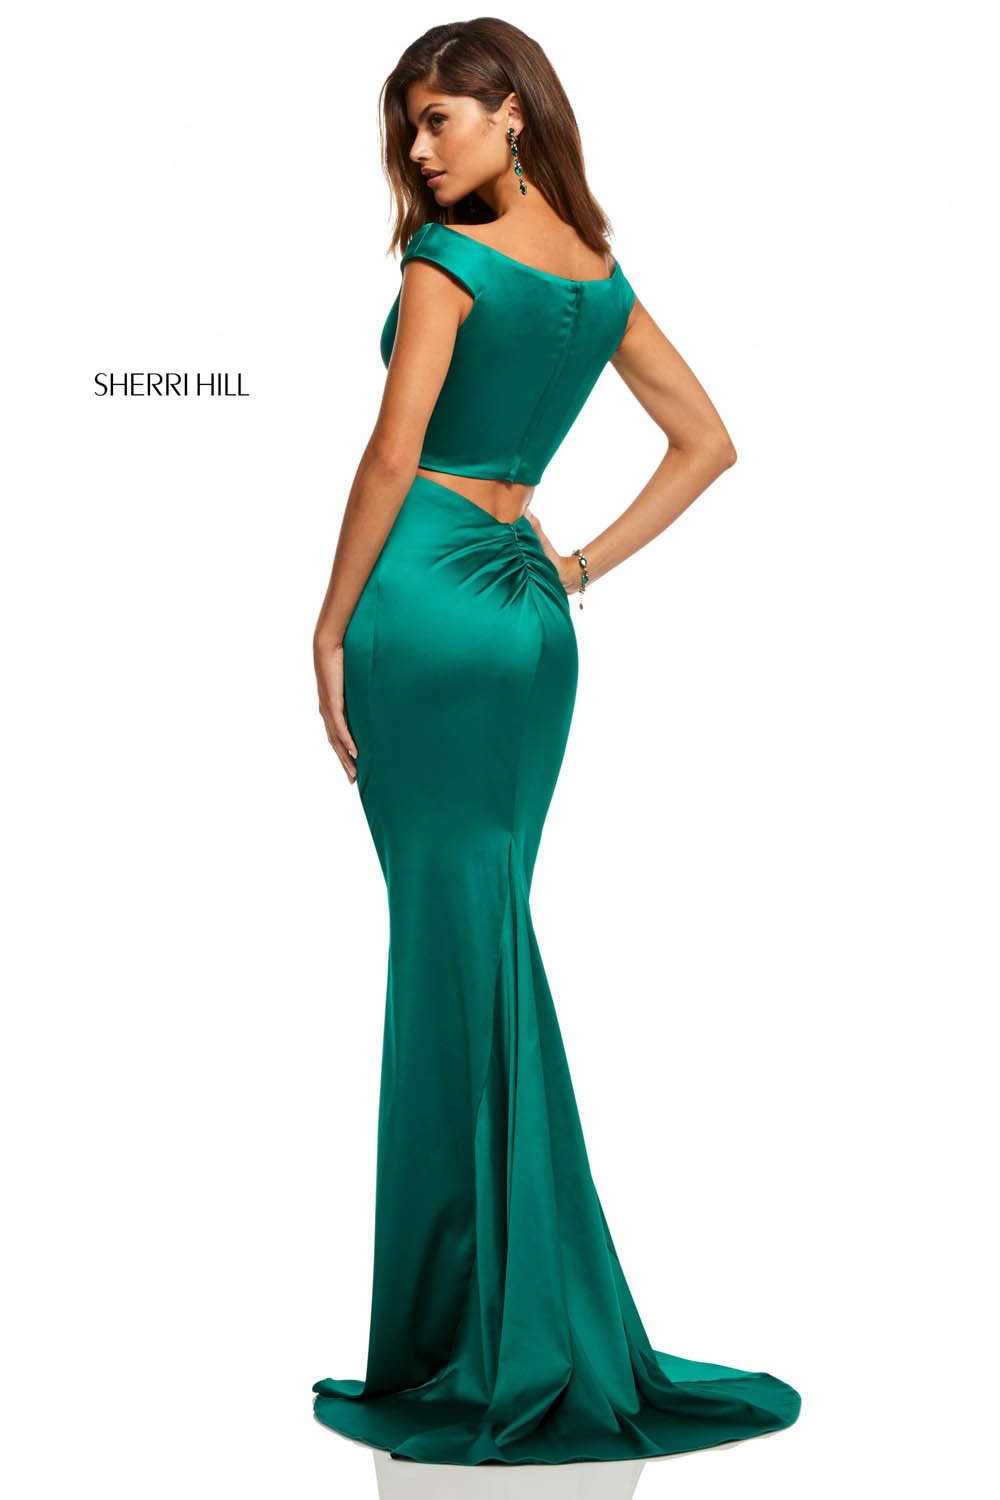 Sherri Hill 52612 dress images in these colors: Royal, Mocha, Ruby, Black, Navy, Teal, Red, Blush, Berry, Emerald.